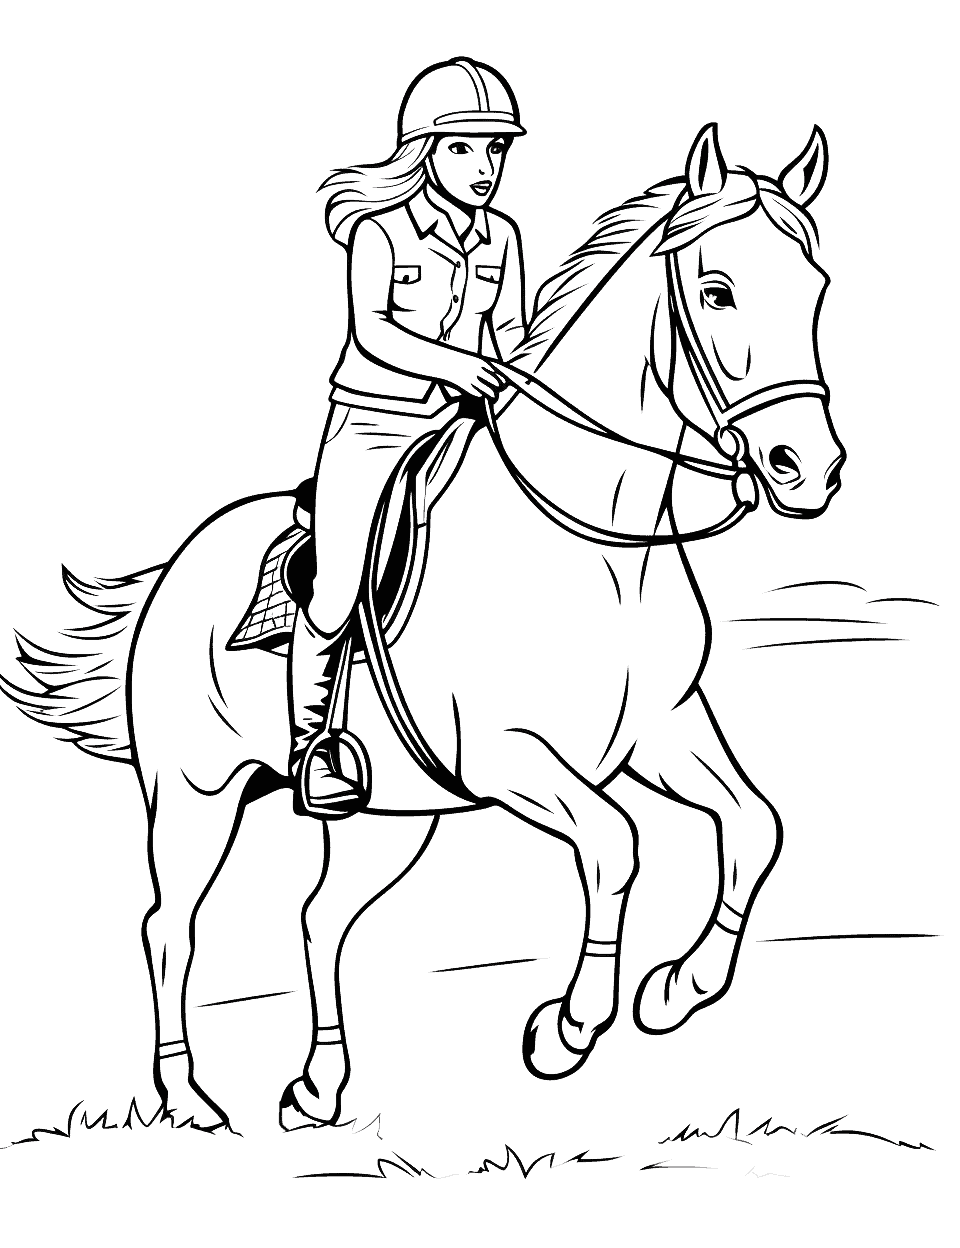 Jumping Horse and Rider Coloring Page - An athletic horse and its rider soaring over a jump in an equestrian competition.